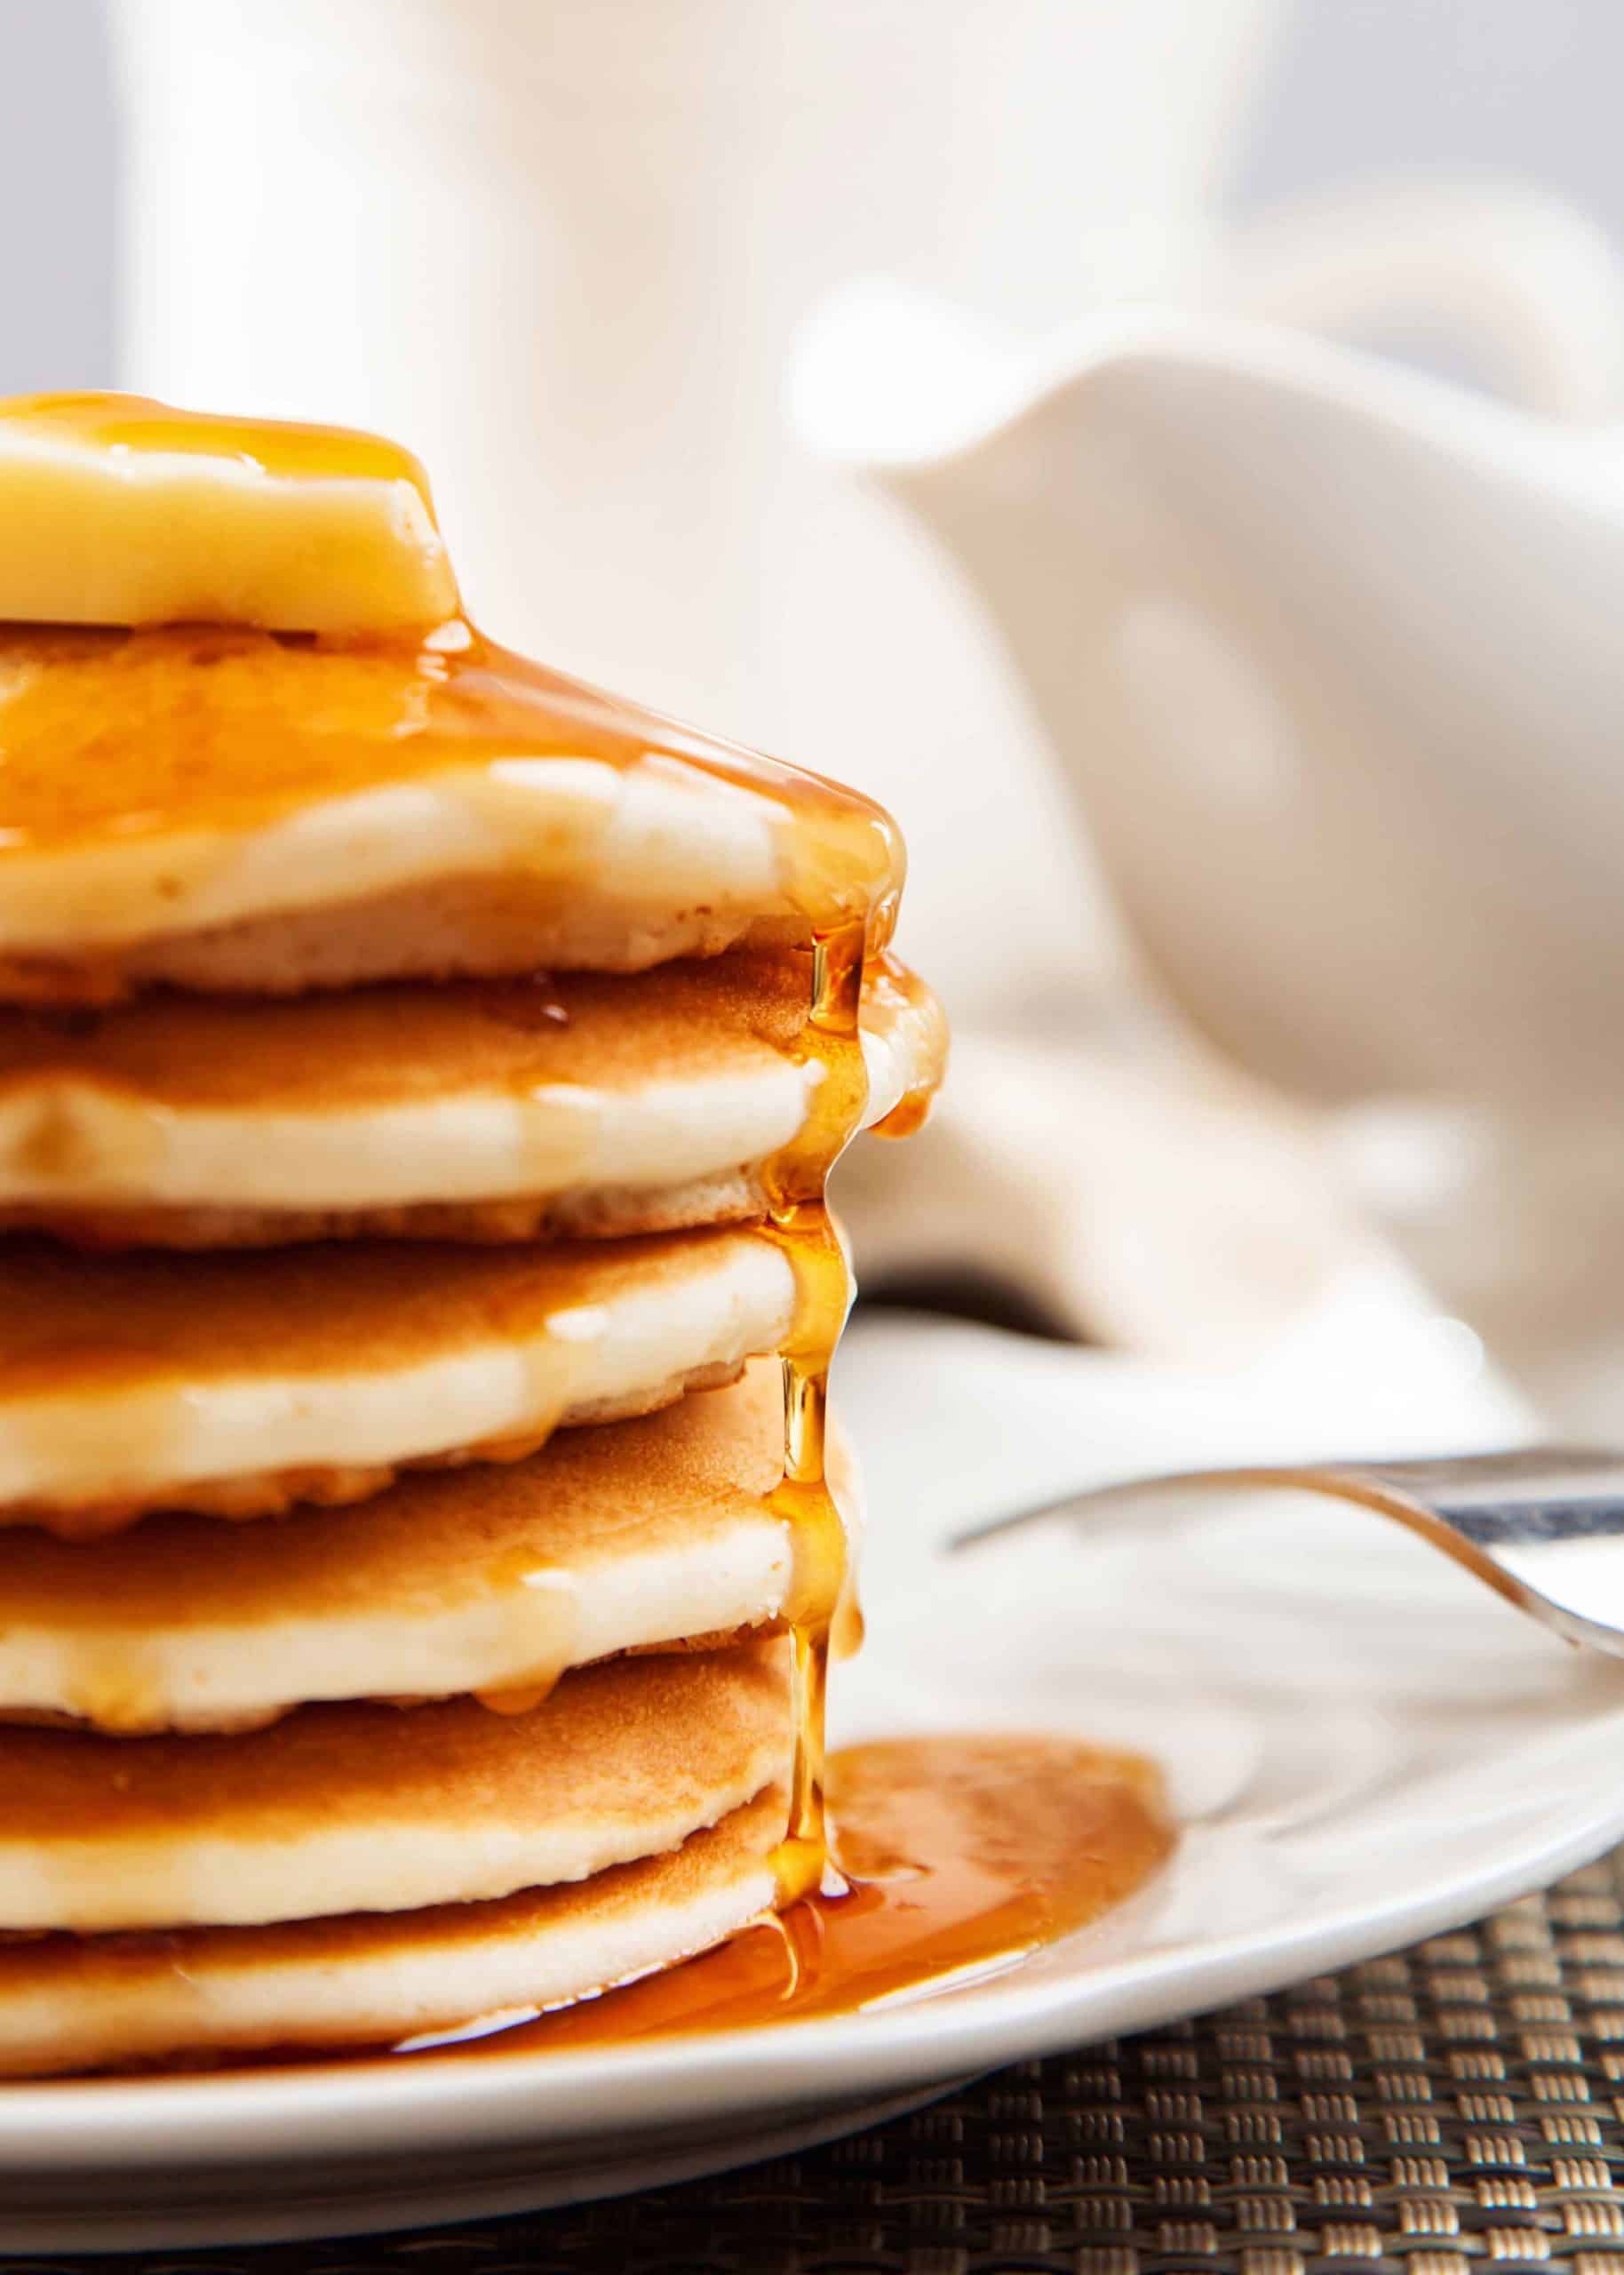 Cropped view of tall stack of dollar pancakes with maple syrup dripping